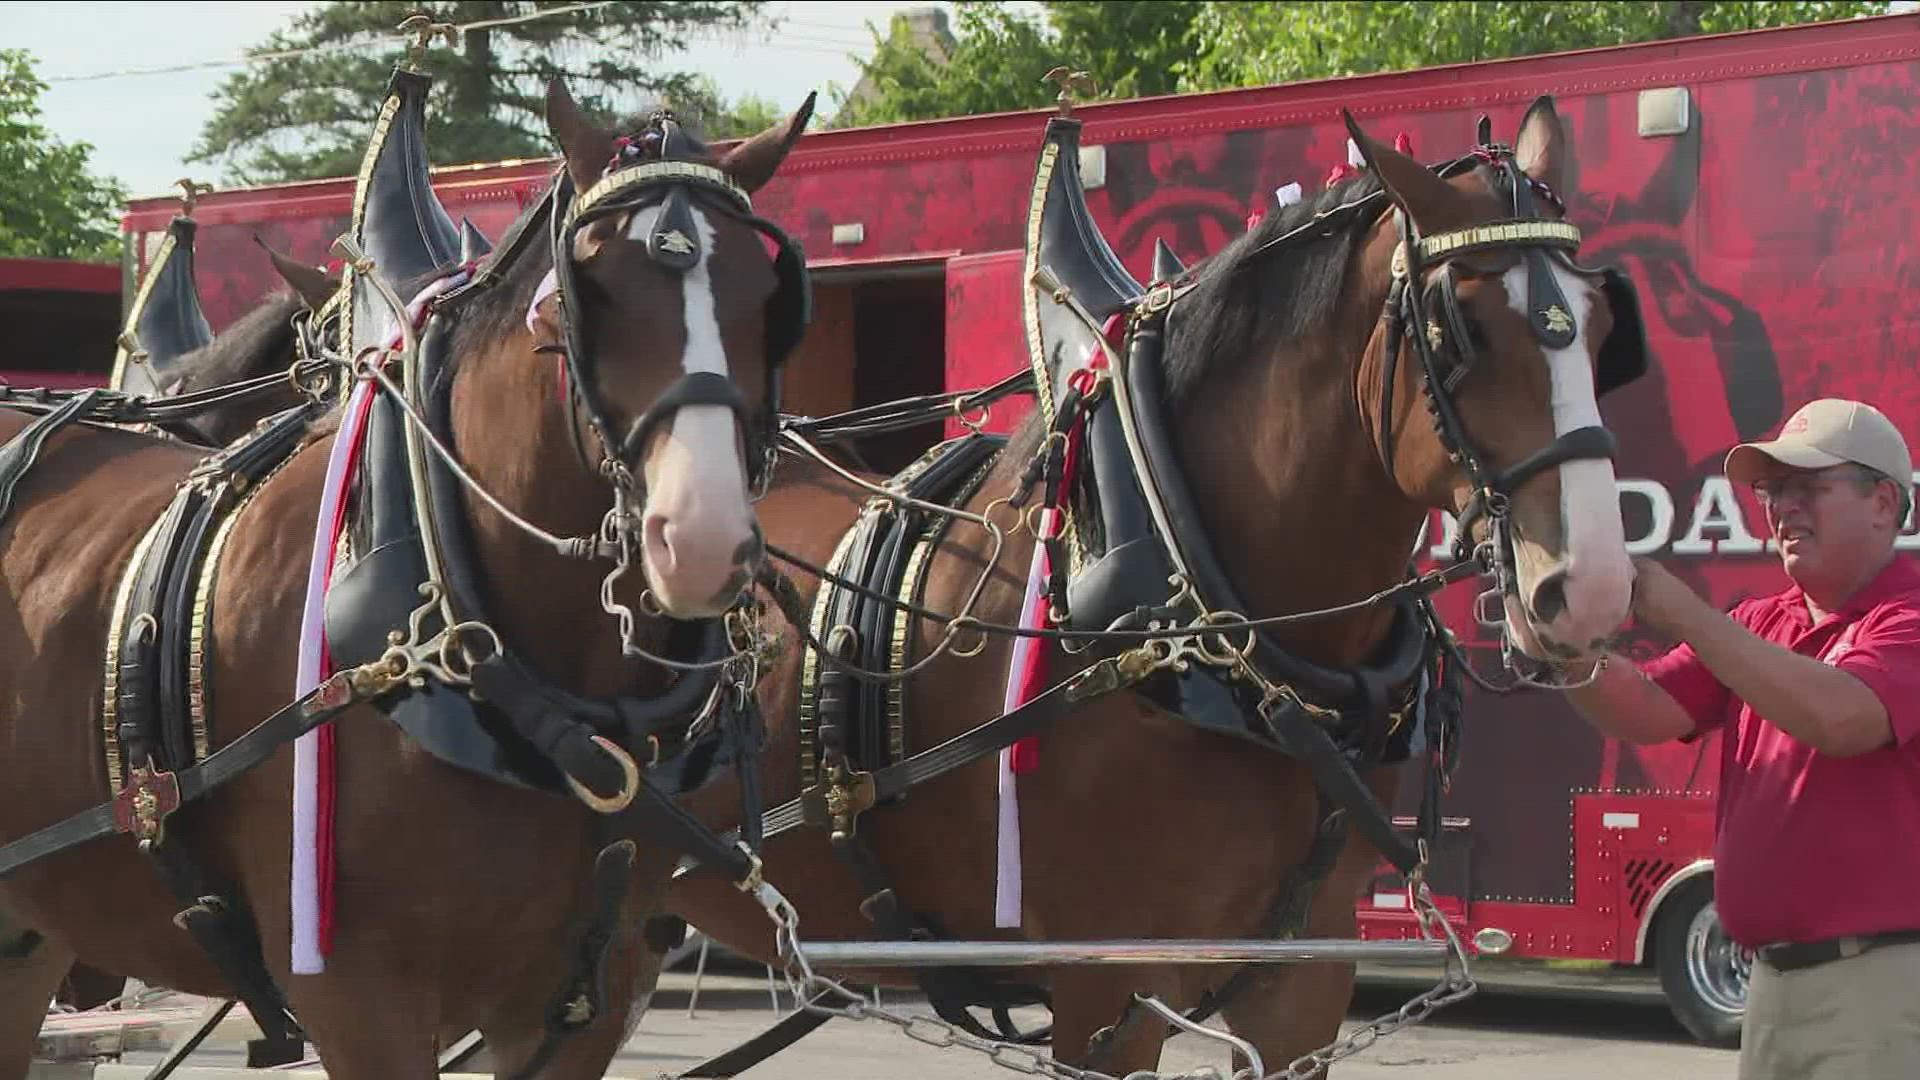 Western New York got a special visit from the Budweiser Clydesdales! You may have seen them in commercials, but tonight the horses took to Hertel Ave. for a parade.